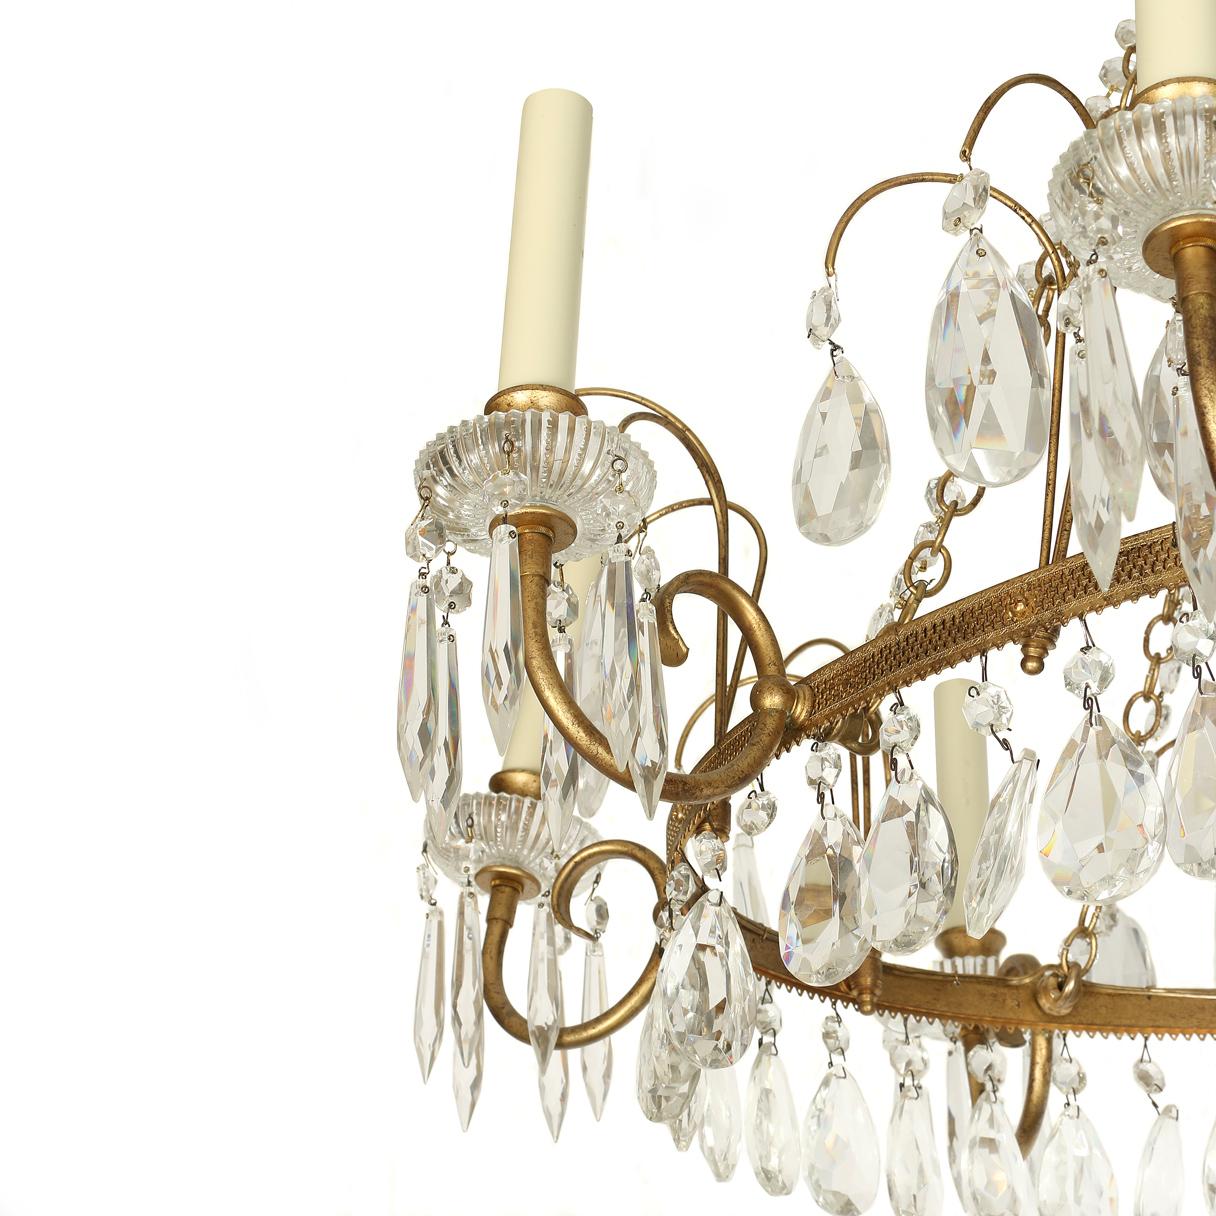 Antique Baltic gilt metal and crystal ten-arm chandelier in oval shape with three tiers.